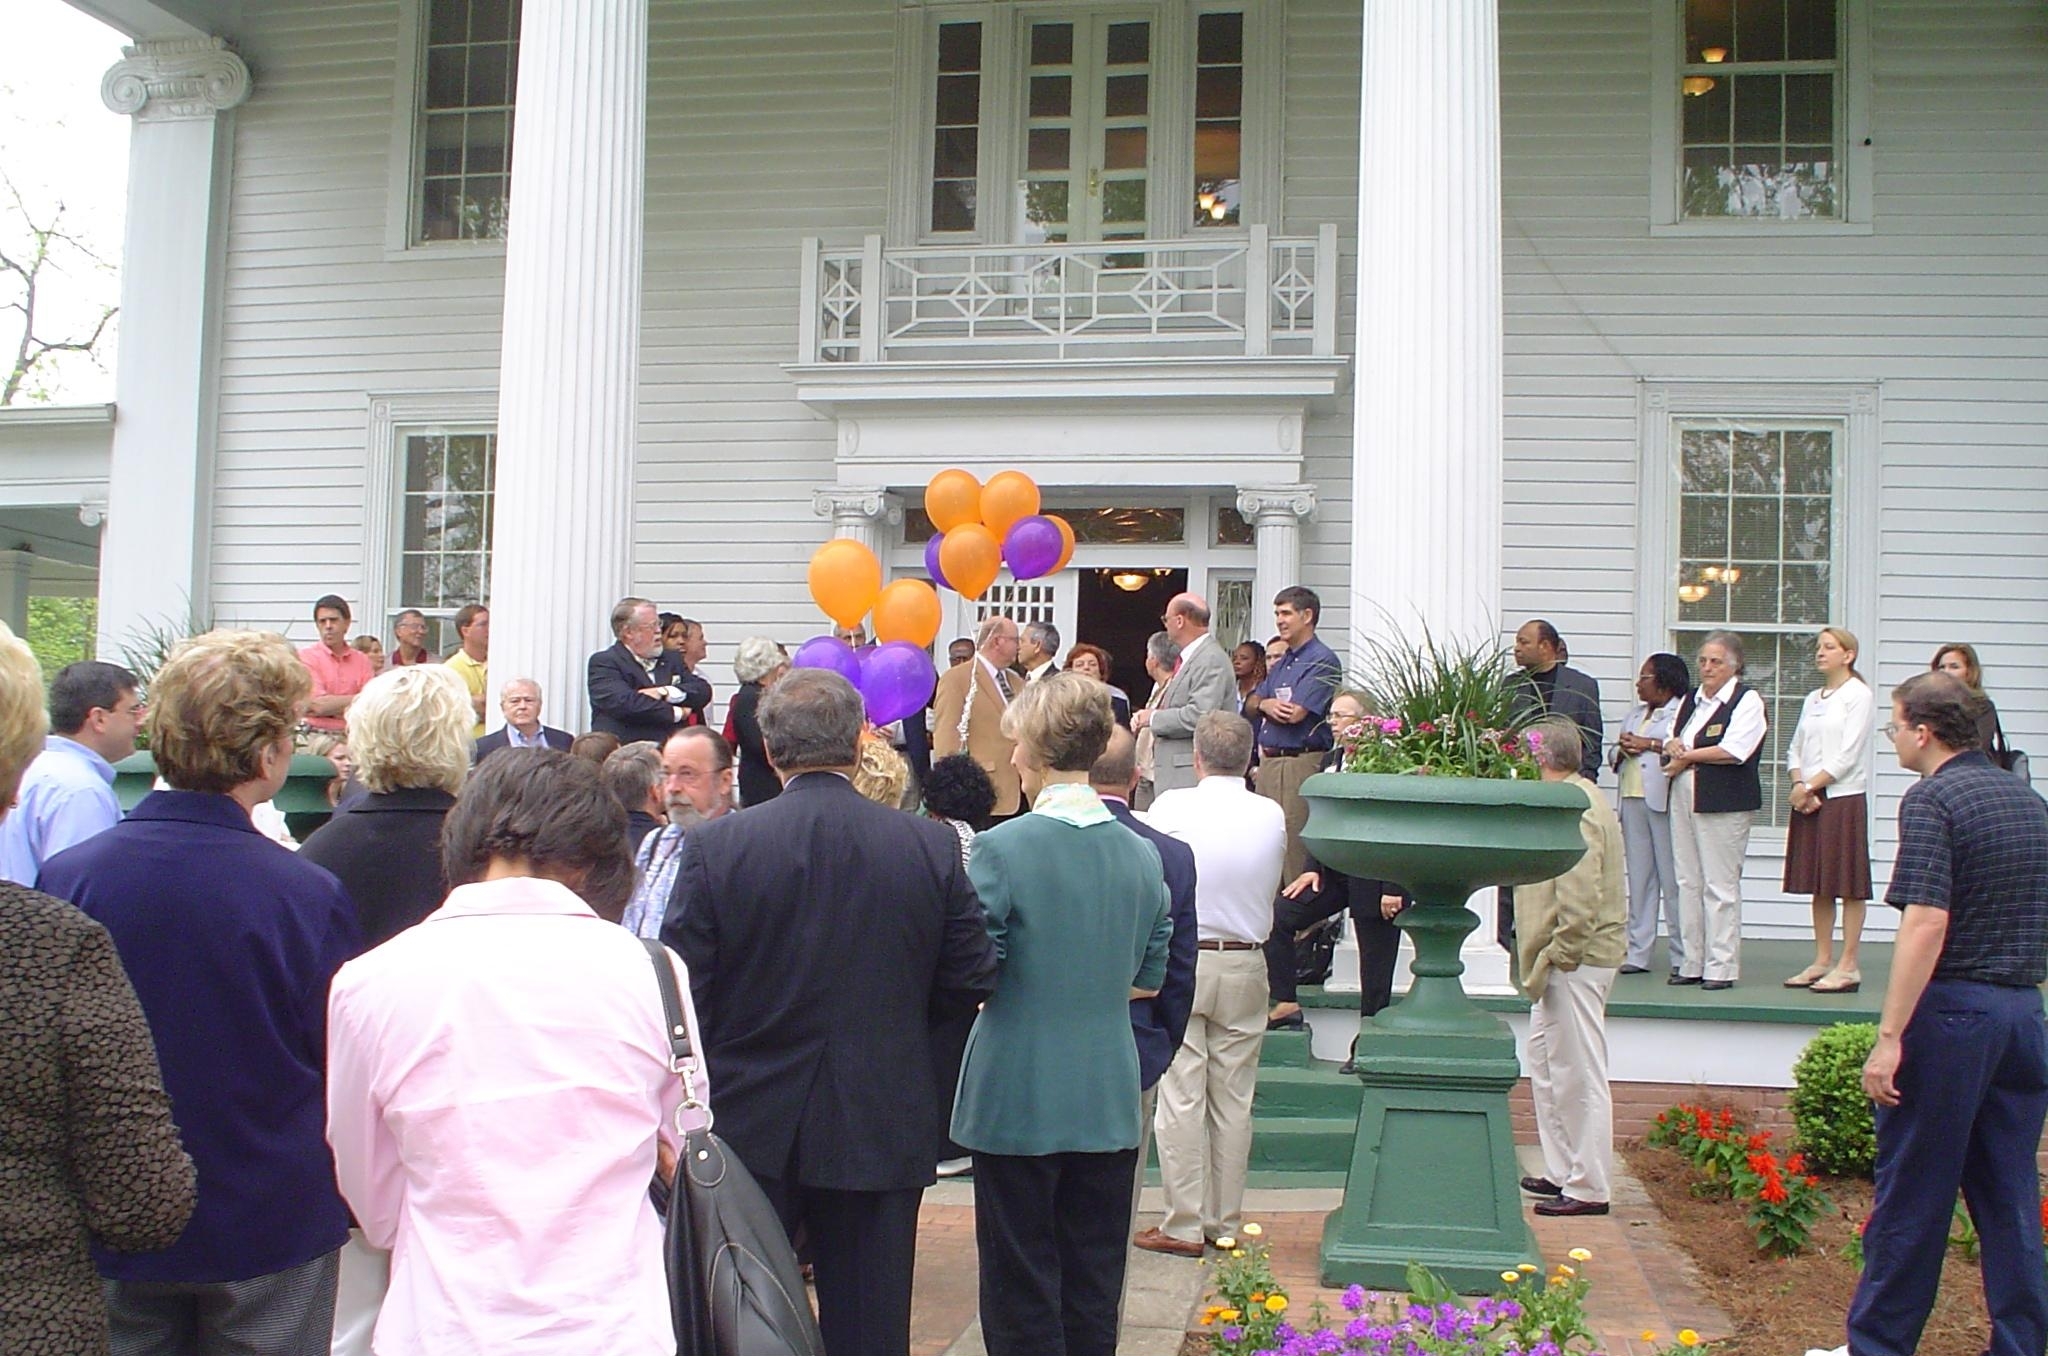 Bus tour participants gather outside the historic Troutman House (circa 1870) in preparation for a walking tour of downtown Fort Valley, Georgia.